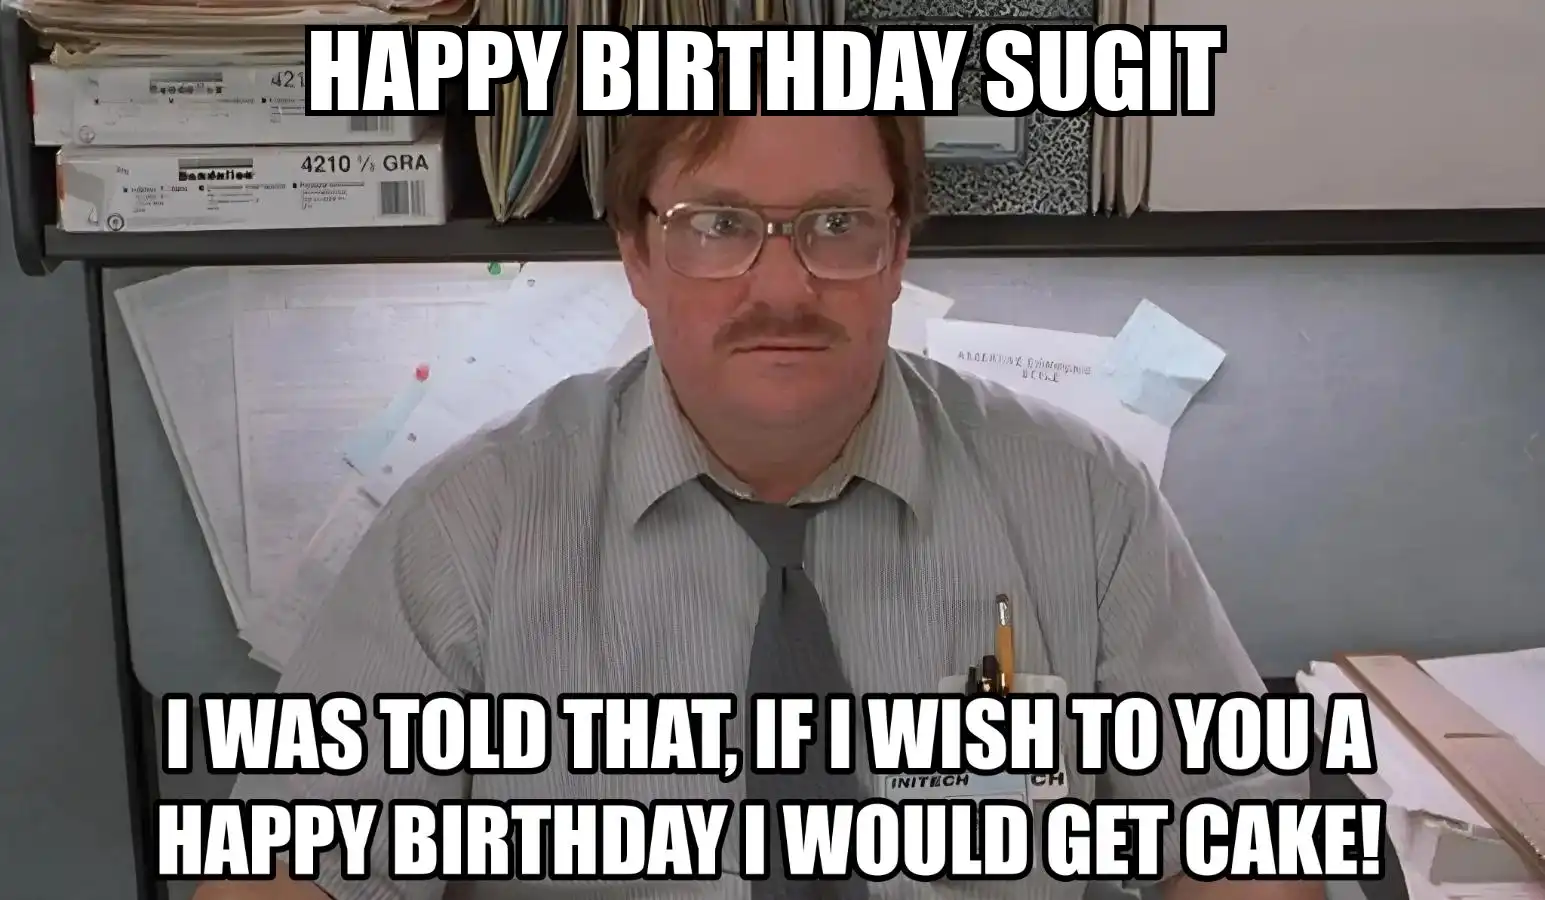 Happy Birthday Sugit I Would Get A Cake Meme